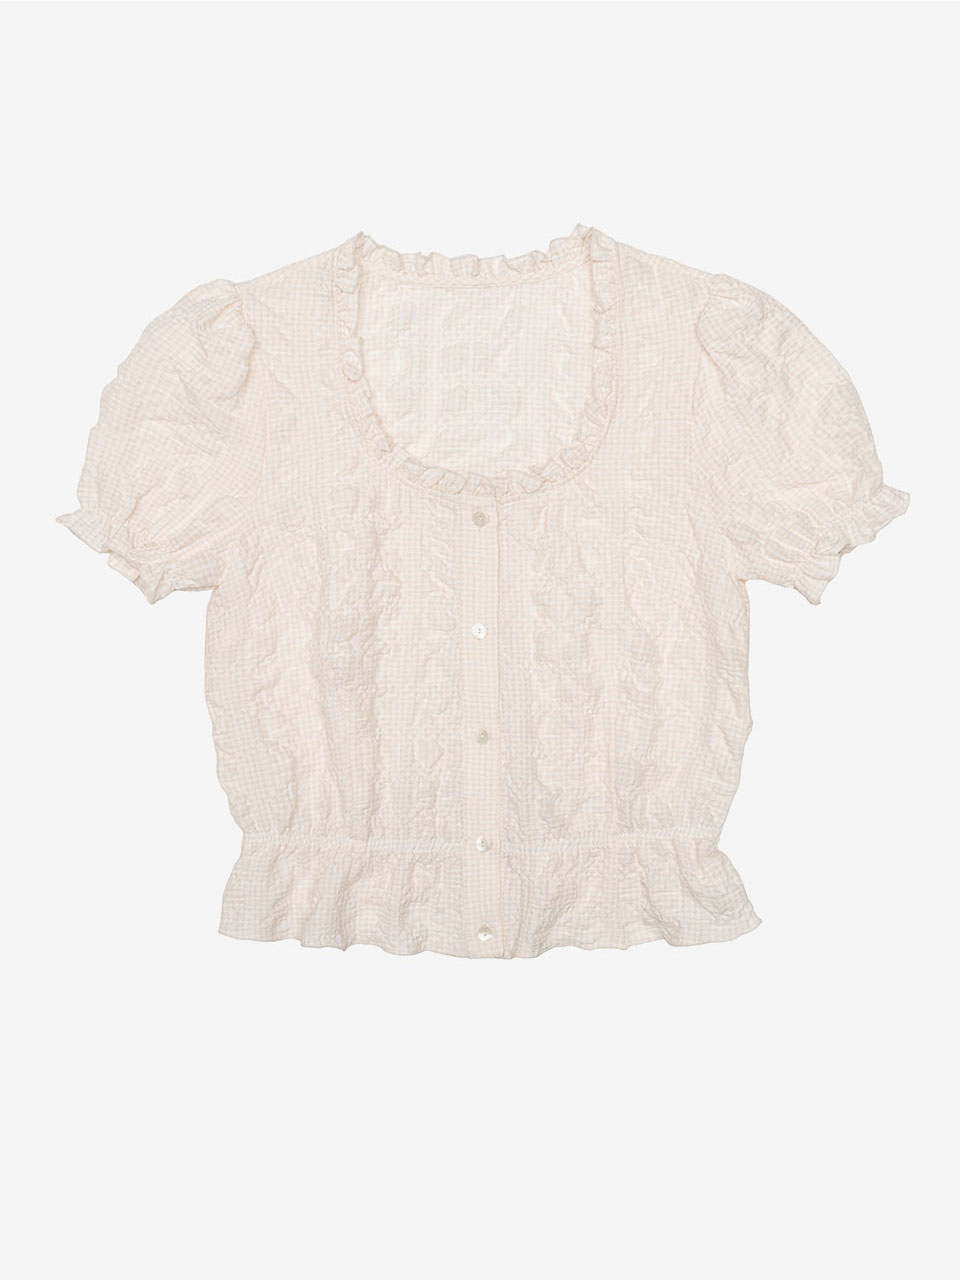 CHECK PATTERN FRILL BLOUSE - BEIGE